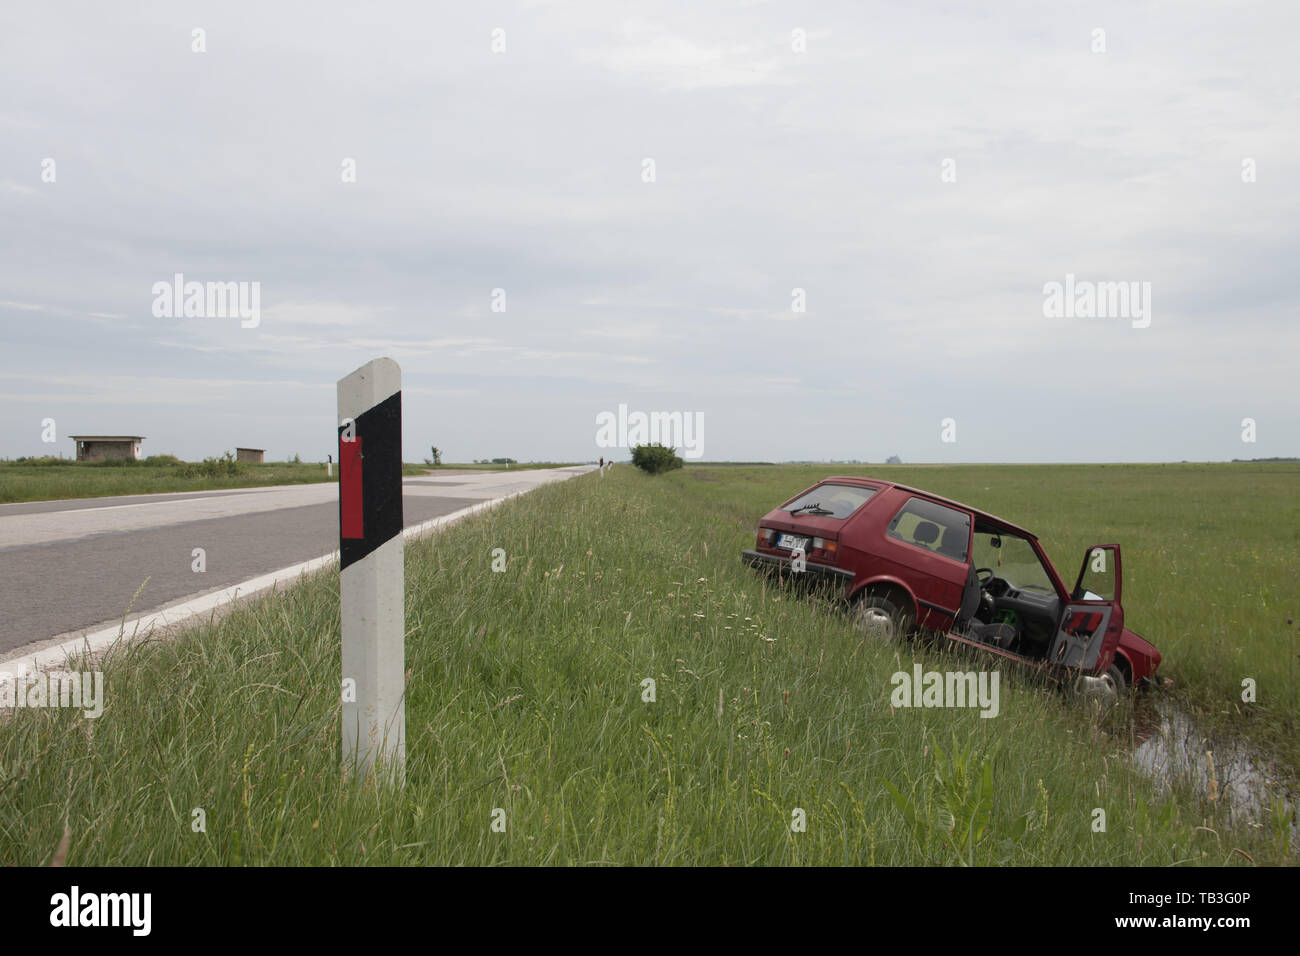 irresponsible driving in bad weather conditions, vehicle went off road in ditch, near Kikinda city Stock Photo